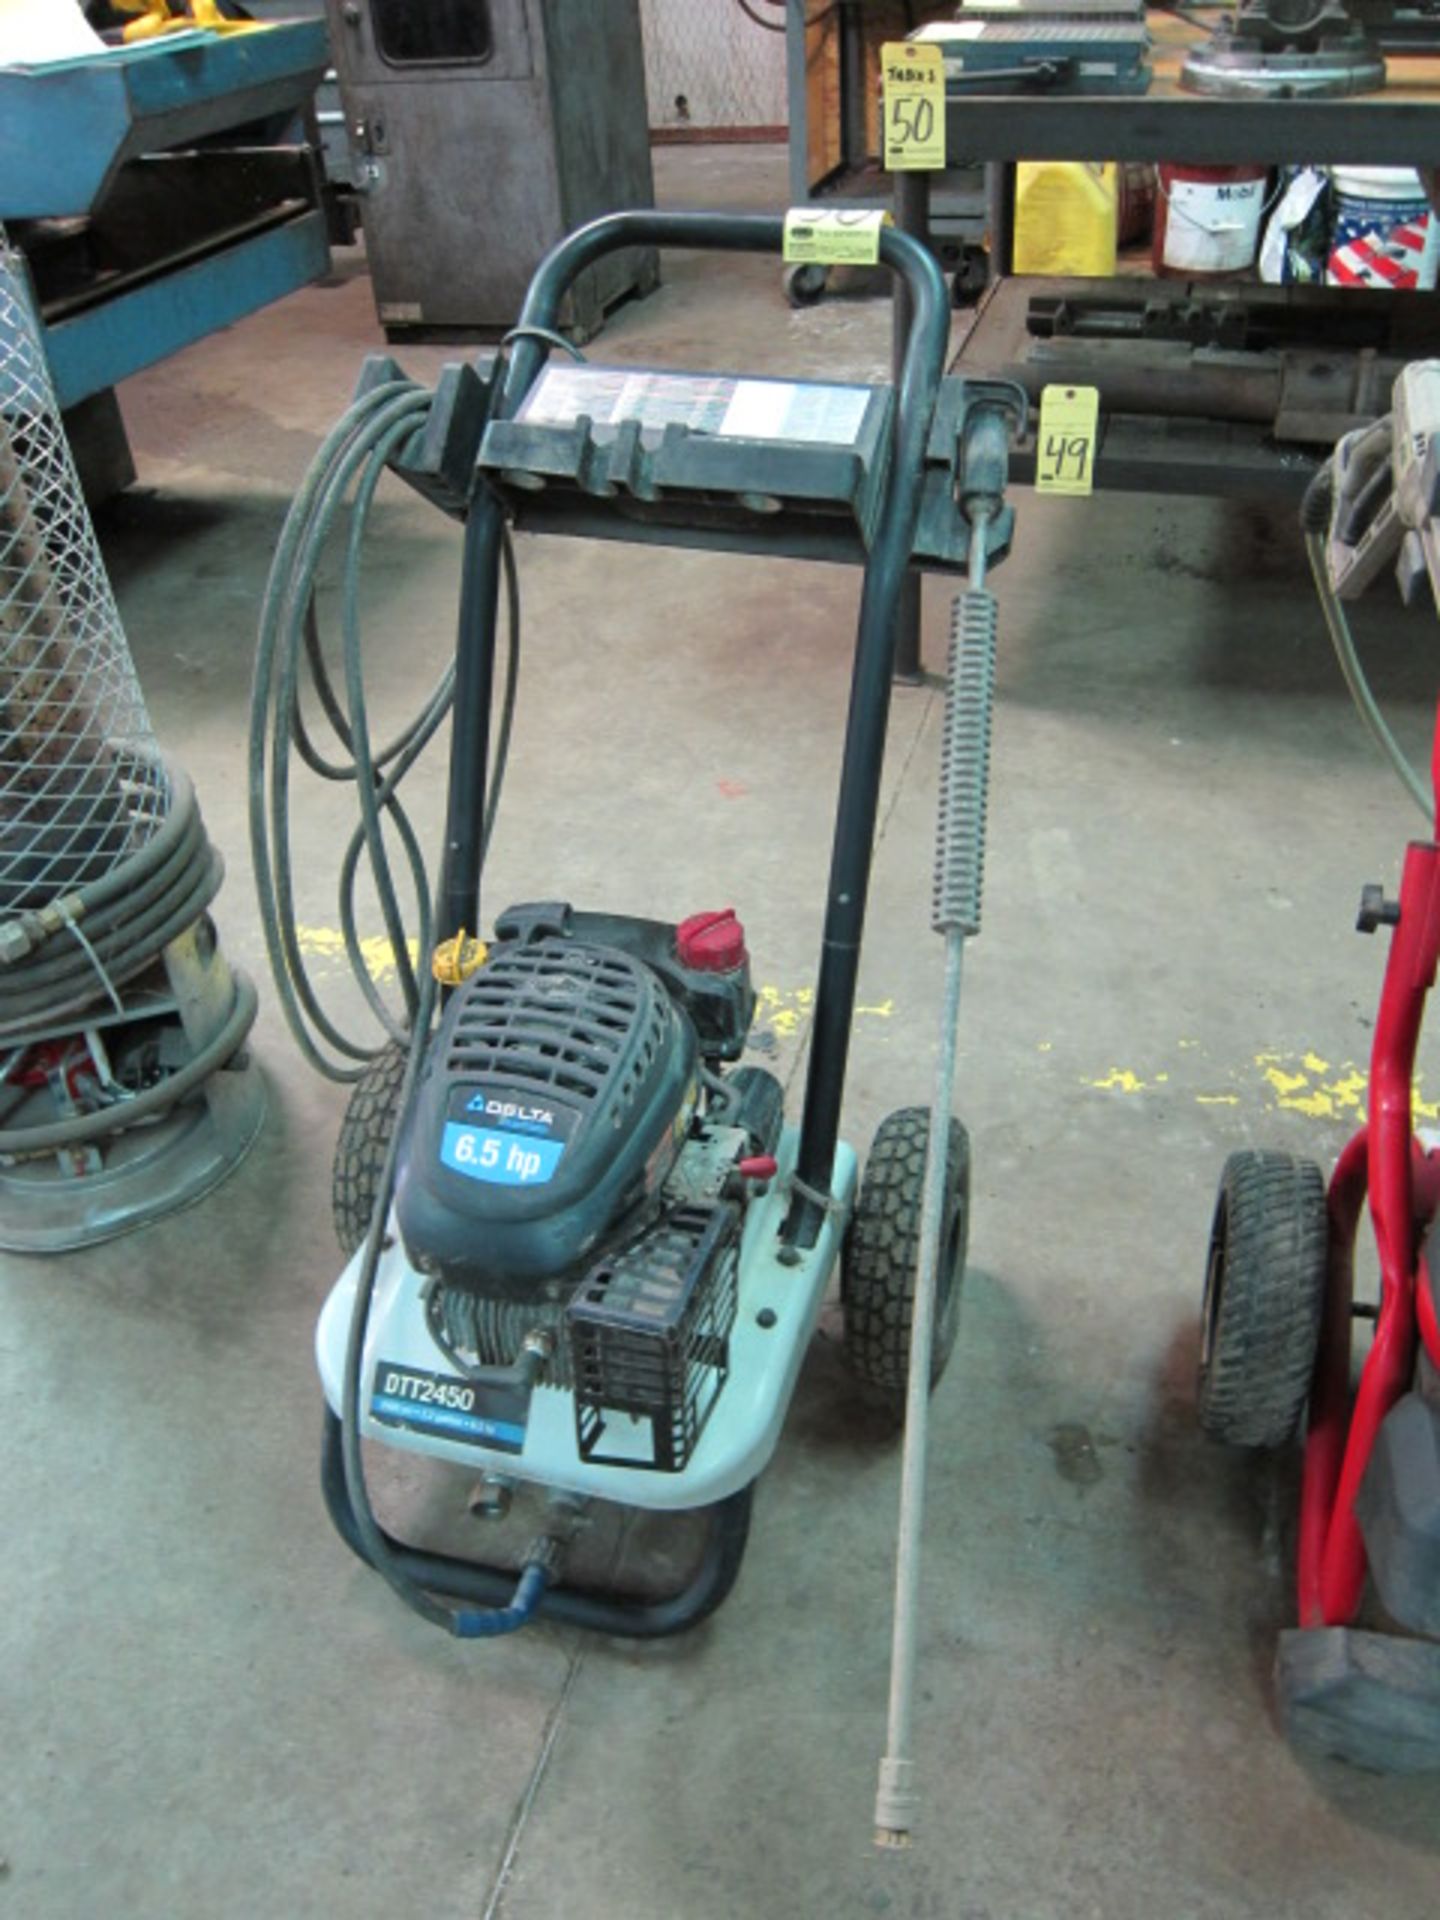 POWER WASHER, DELTA, 6.5 HP motor, 2,450 PSI, 2.2 GPM